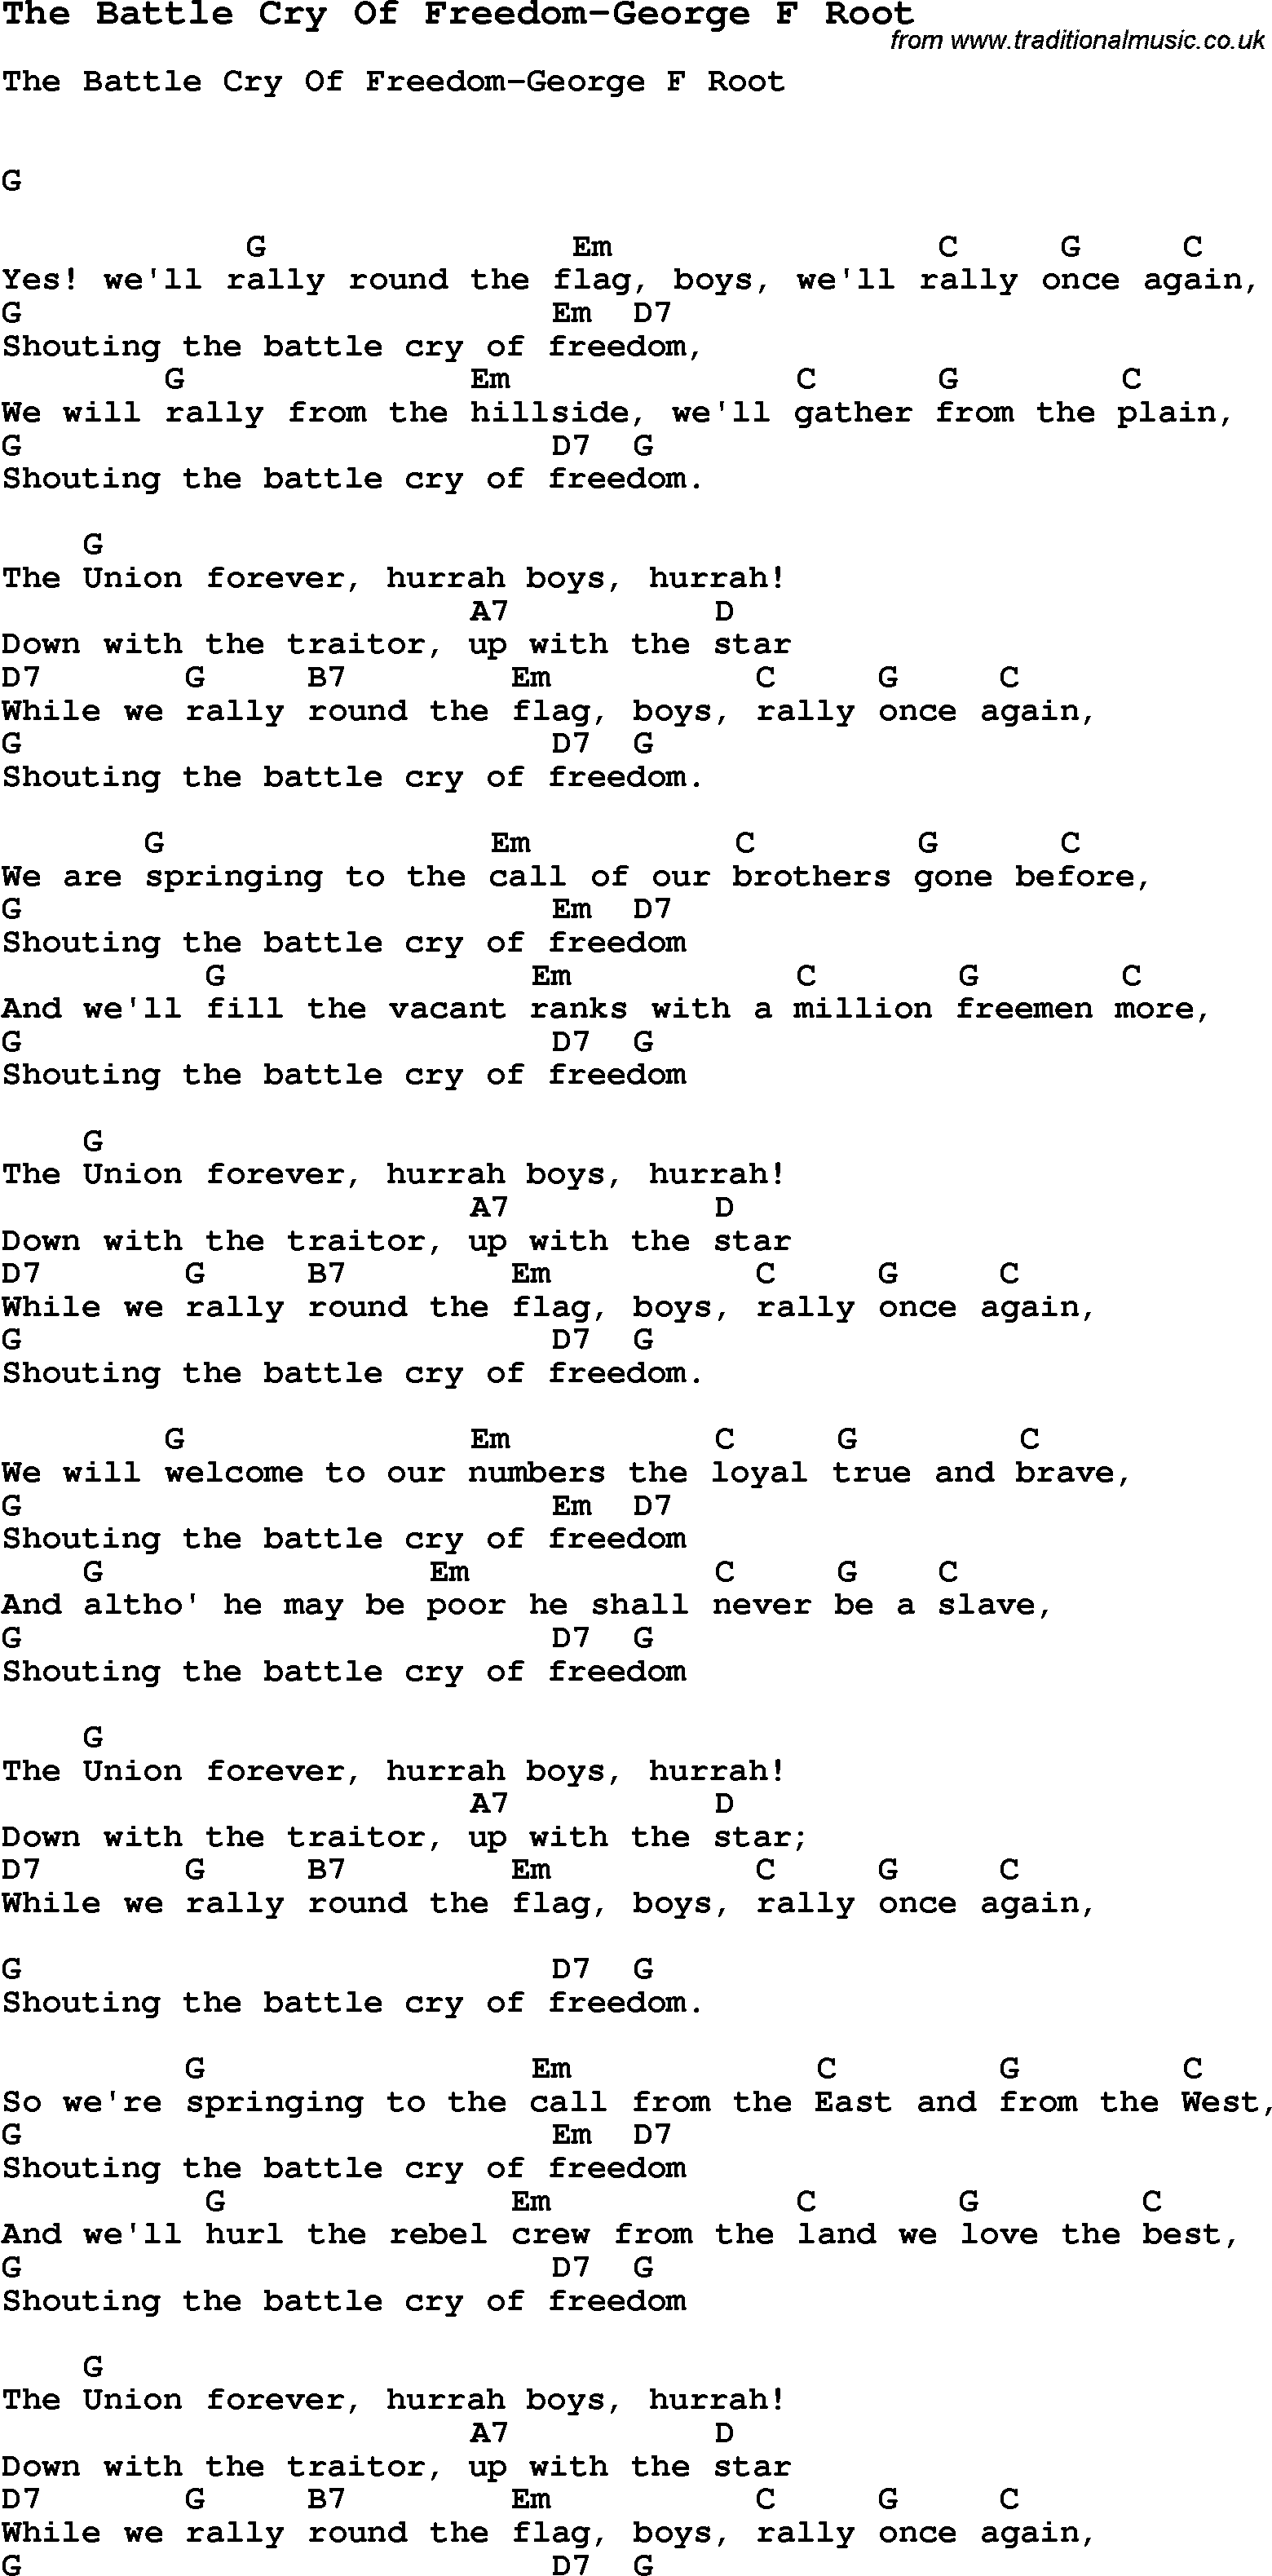 Summer Camp Song, The Battle Cry Of Freedom-George F Root, with lyrics and  chords for Ukulele, Guitar, Banjo etc.